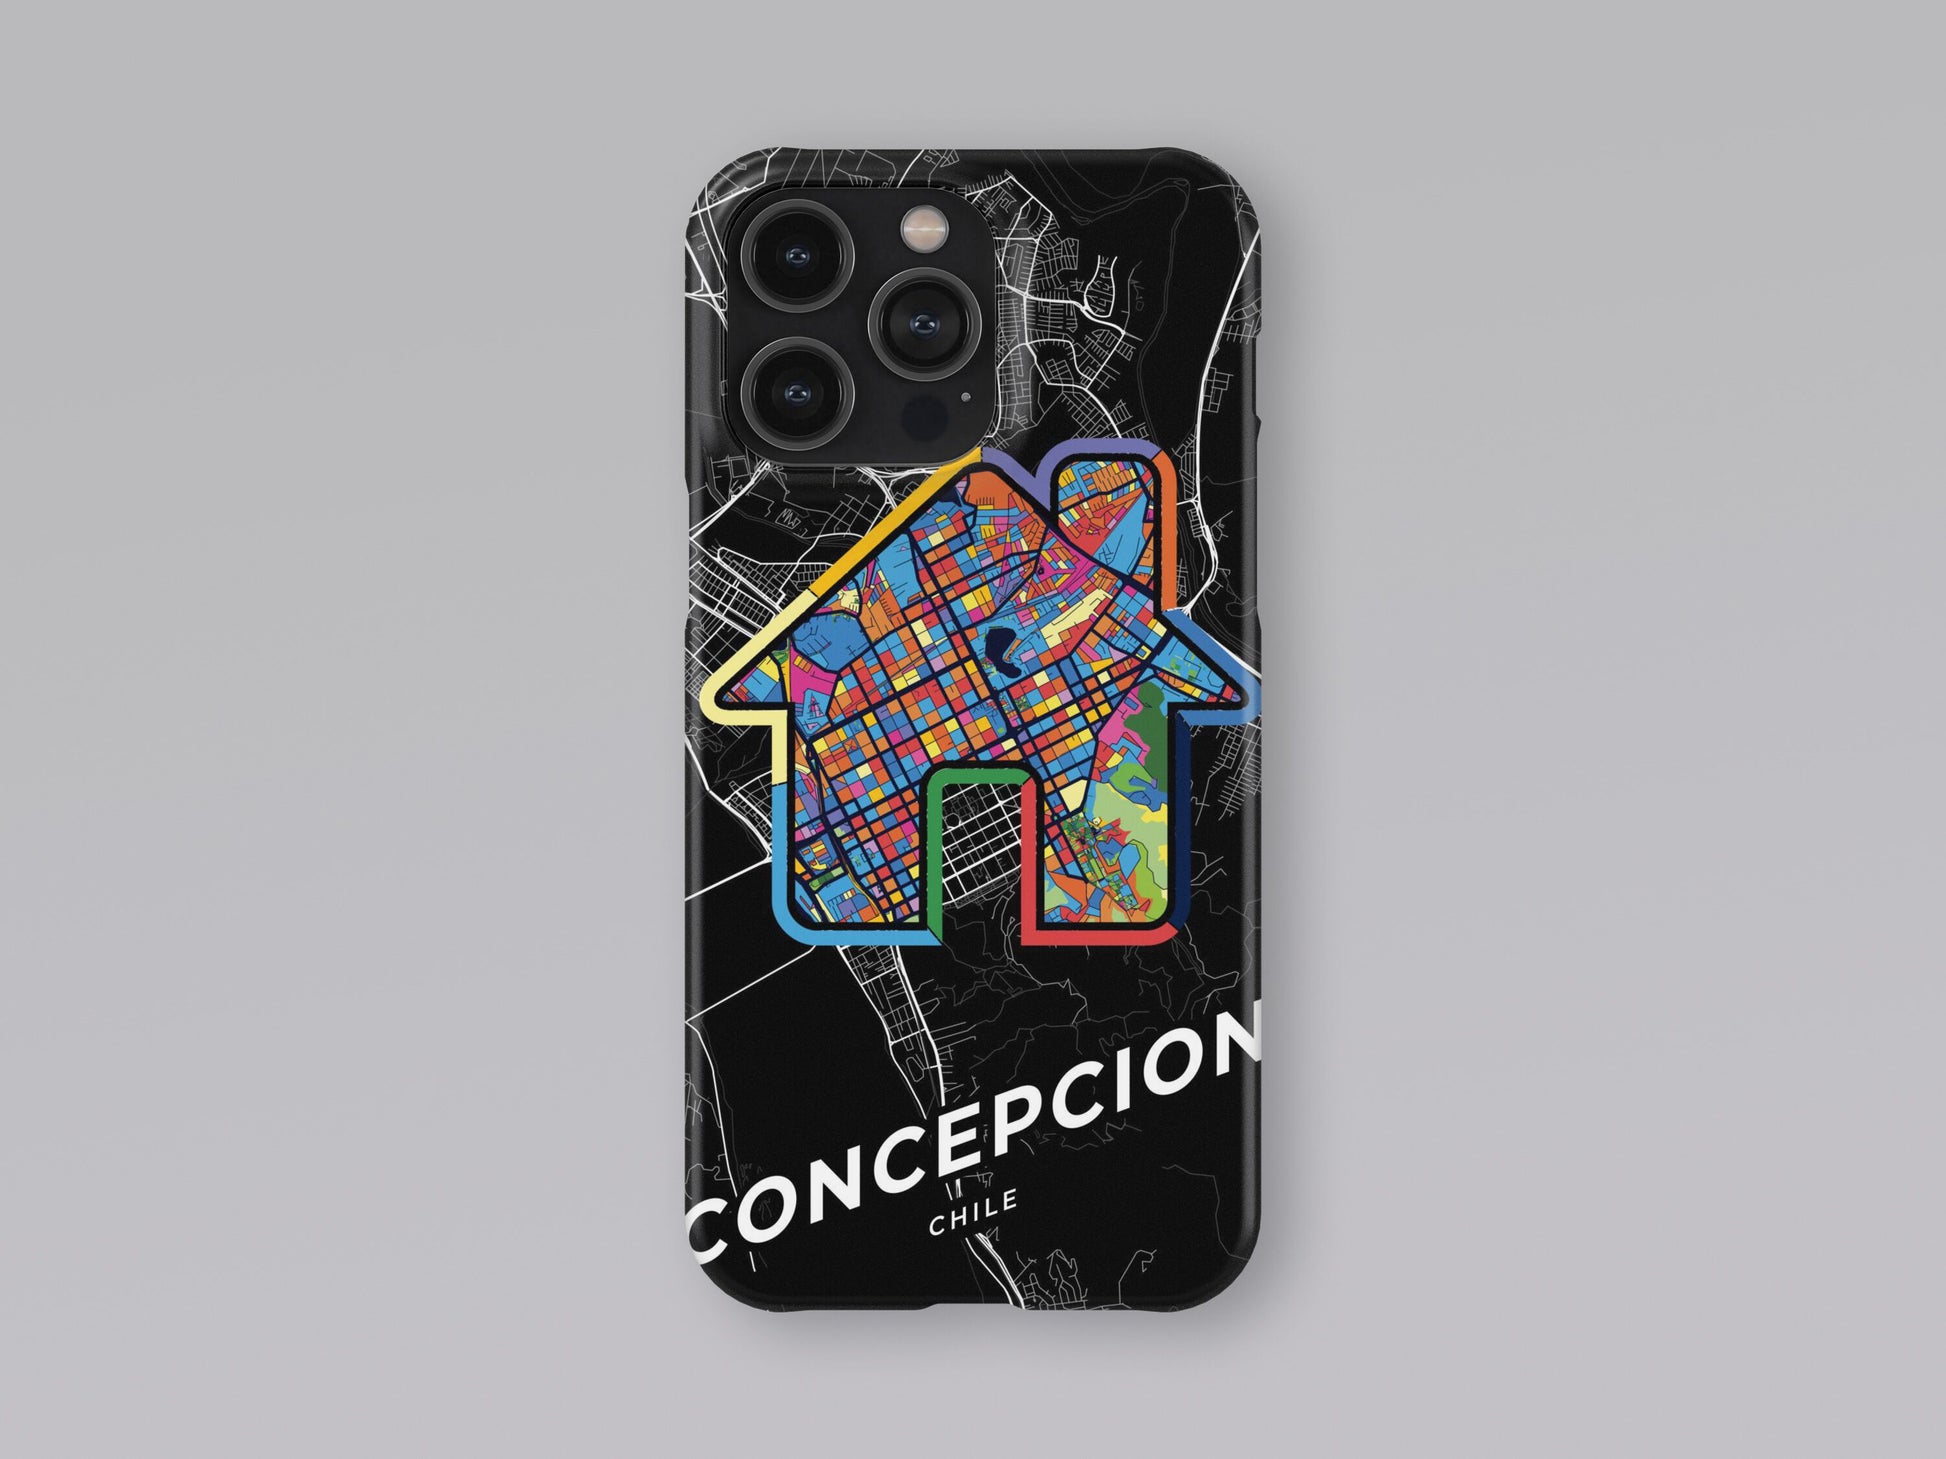 Concepcion Chile slim phone case with colorful icon. Birthday, wedding or housewarming gift. Couple match cases. 3